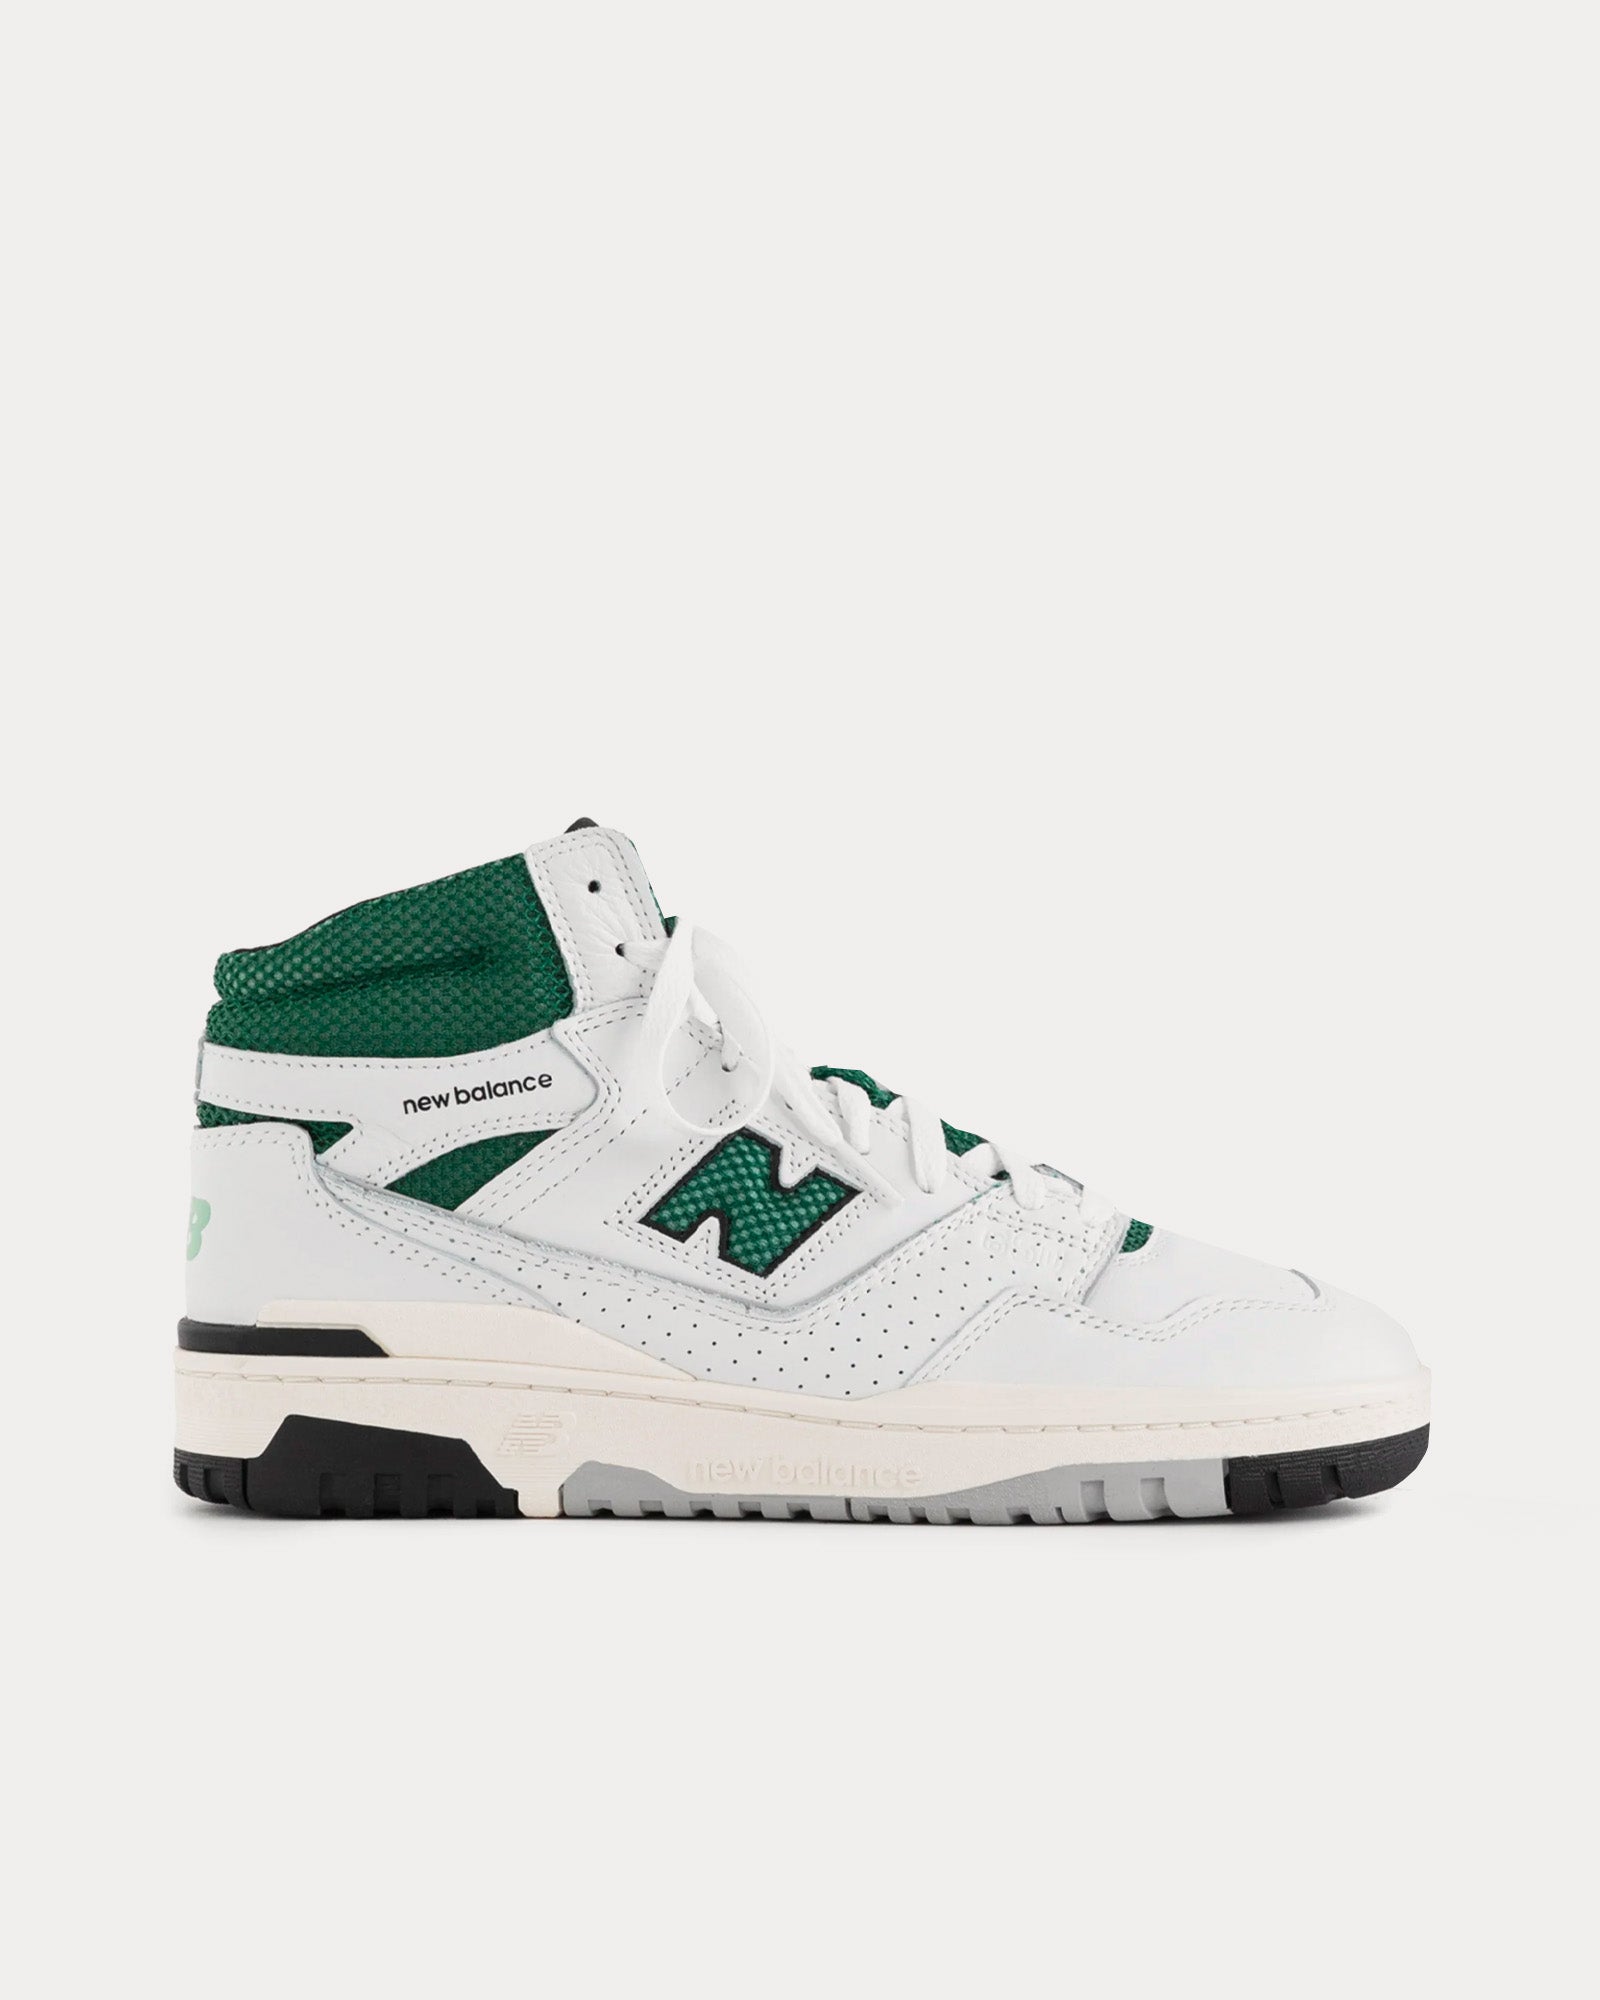 New Balance x Aime Leon Dore - 650r Leather White / Green High Top Sneakers